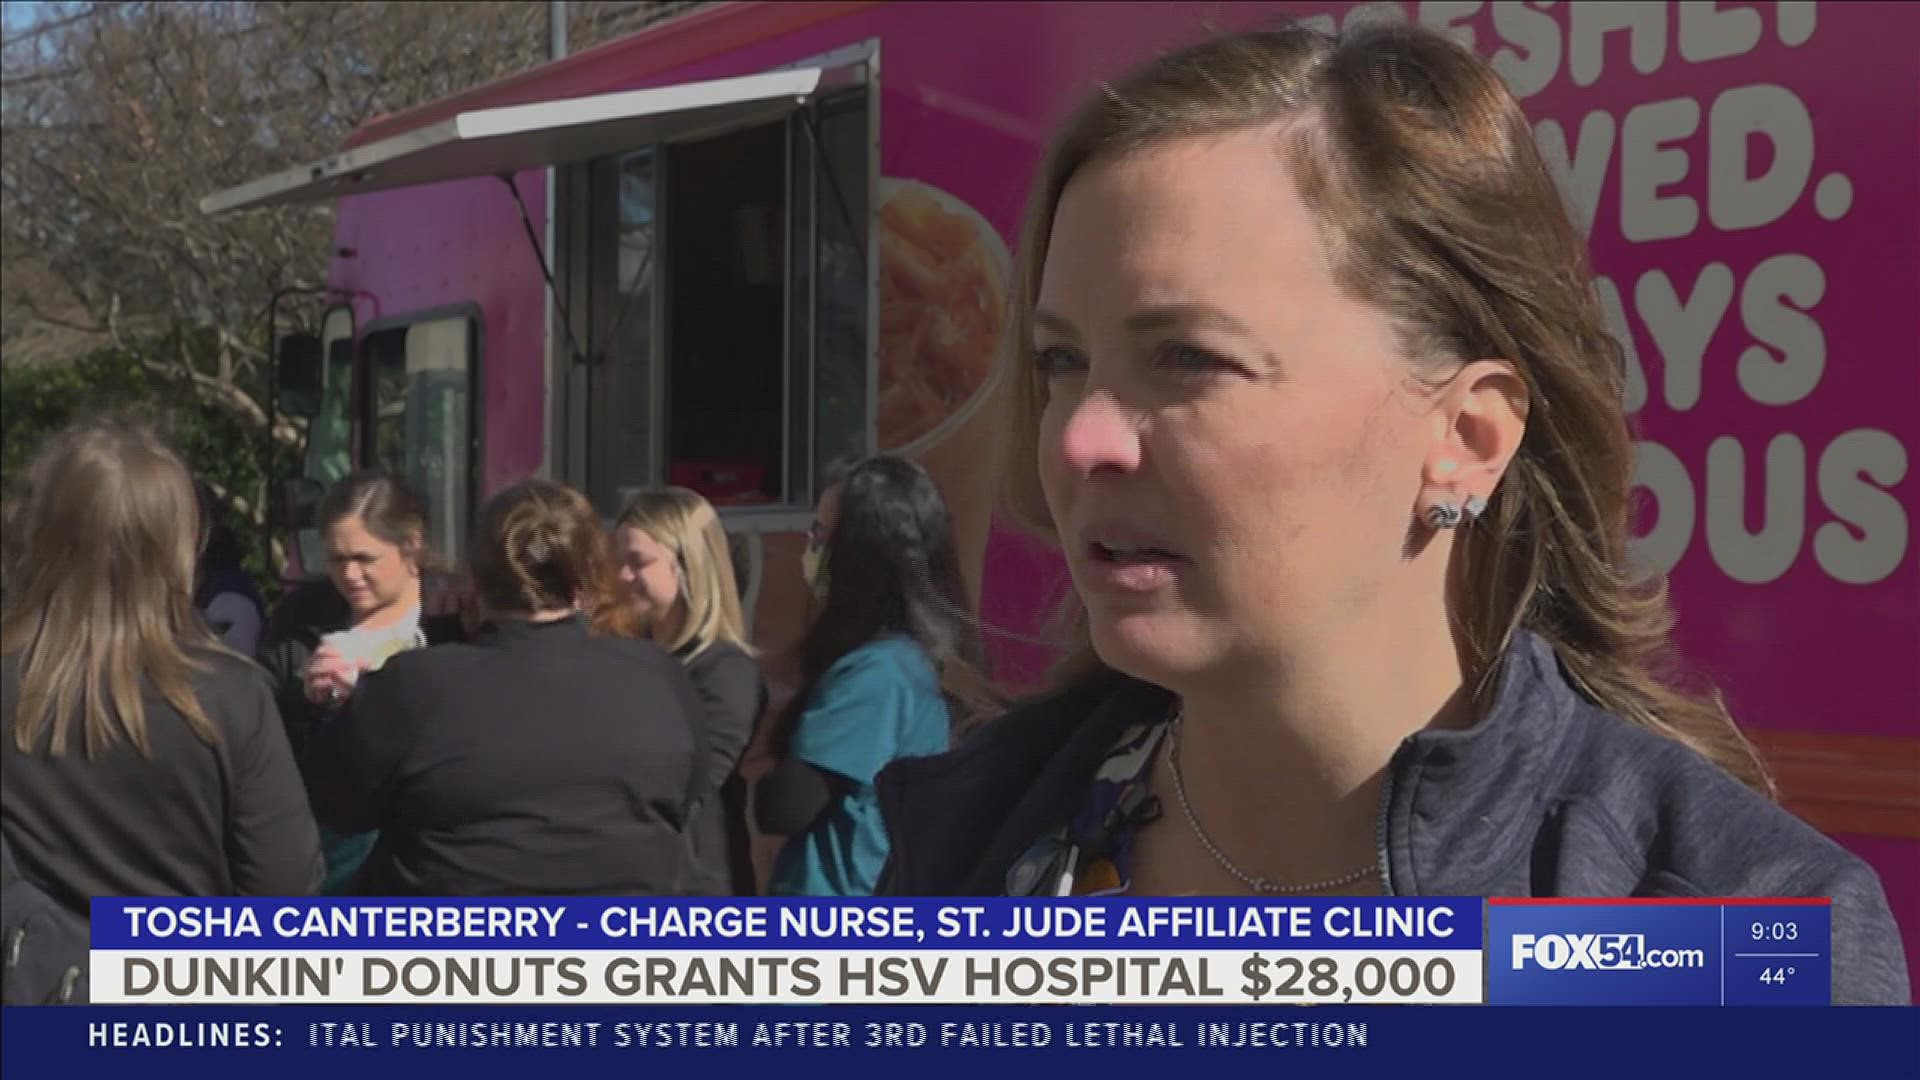 Dunkin Donuts 'Joy in Childhood Foundation' gave a 28-thousand-dollar grant to the Huntsville Hospital for Women and Children.